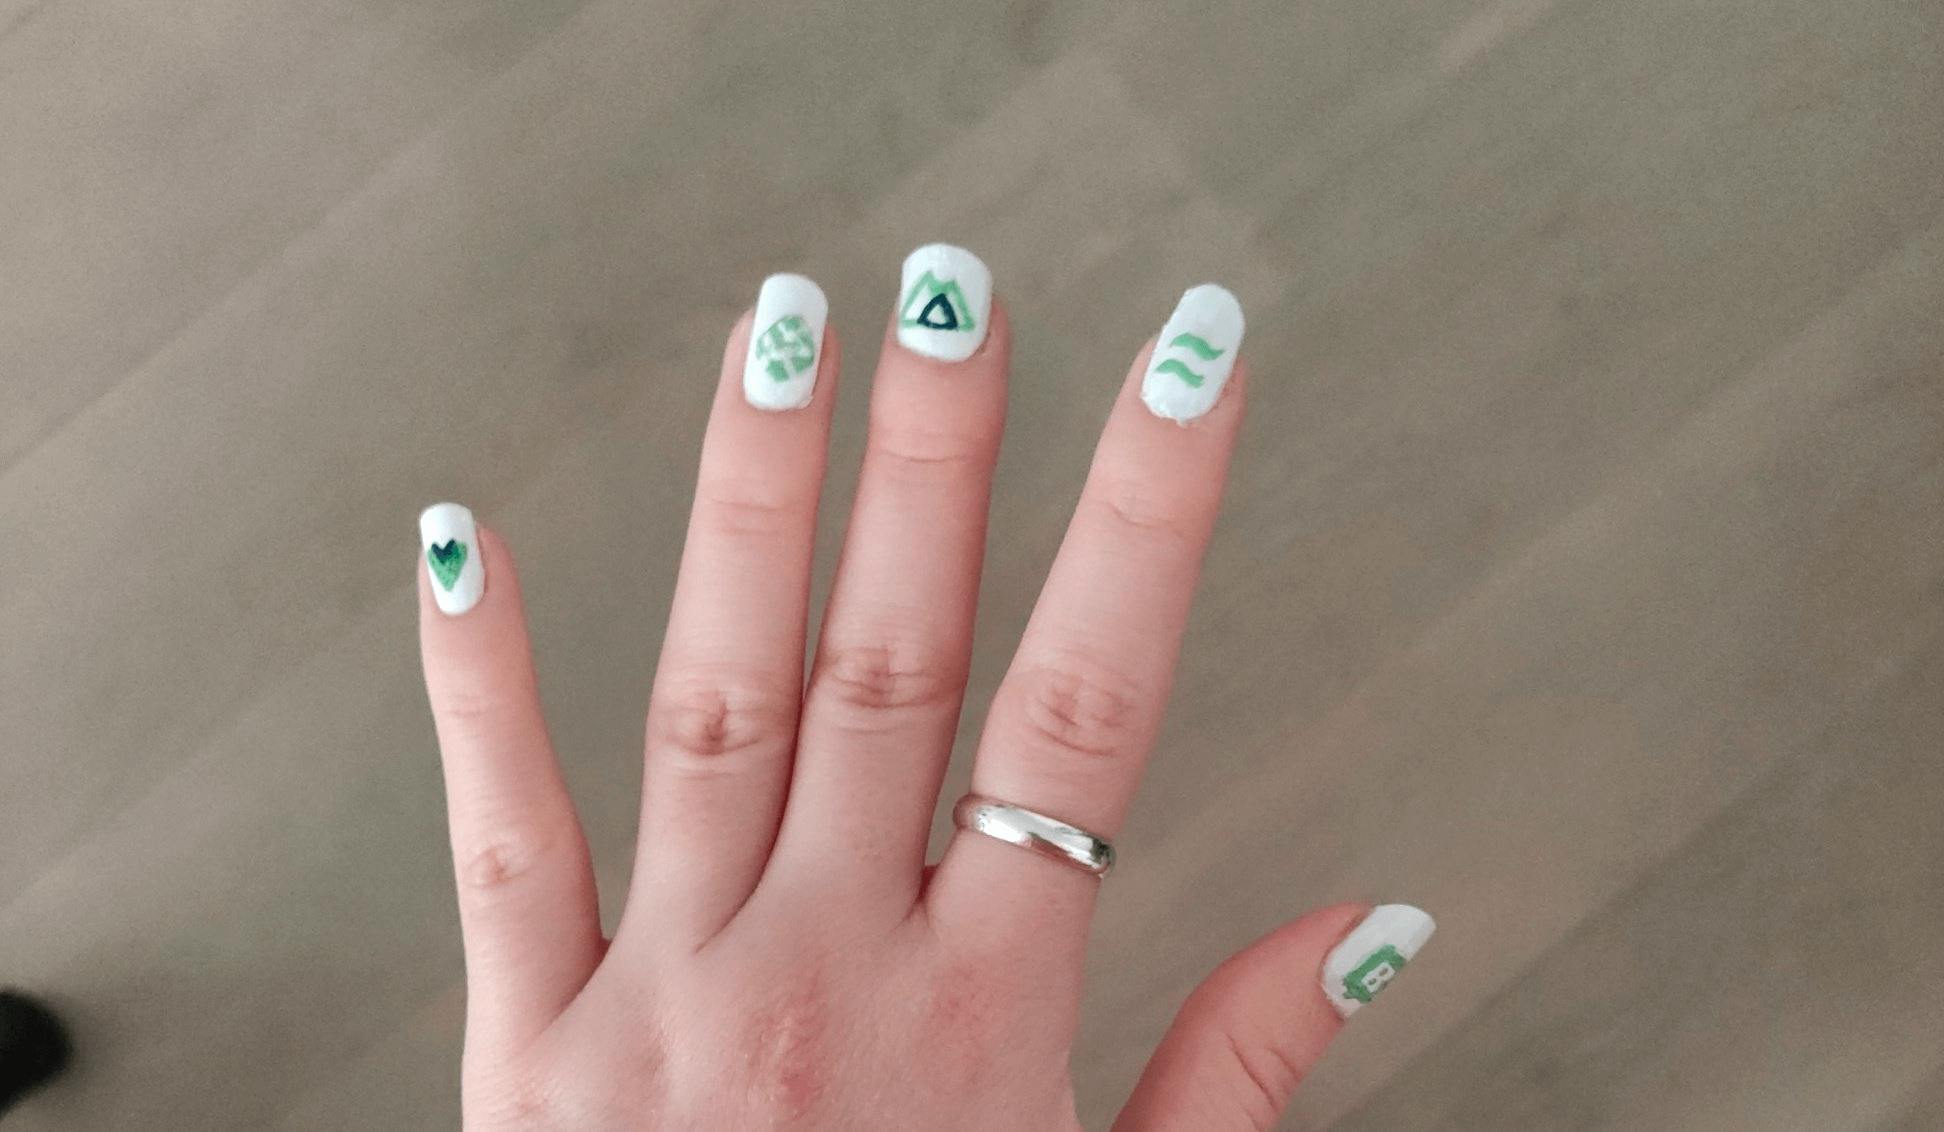 Real painted Jamstack nails including Netlify, Nuxt, Storyblok, Vue and TailwindCSS logos